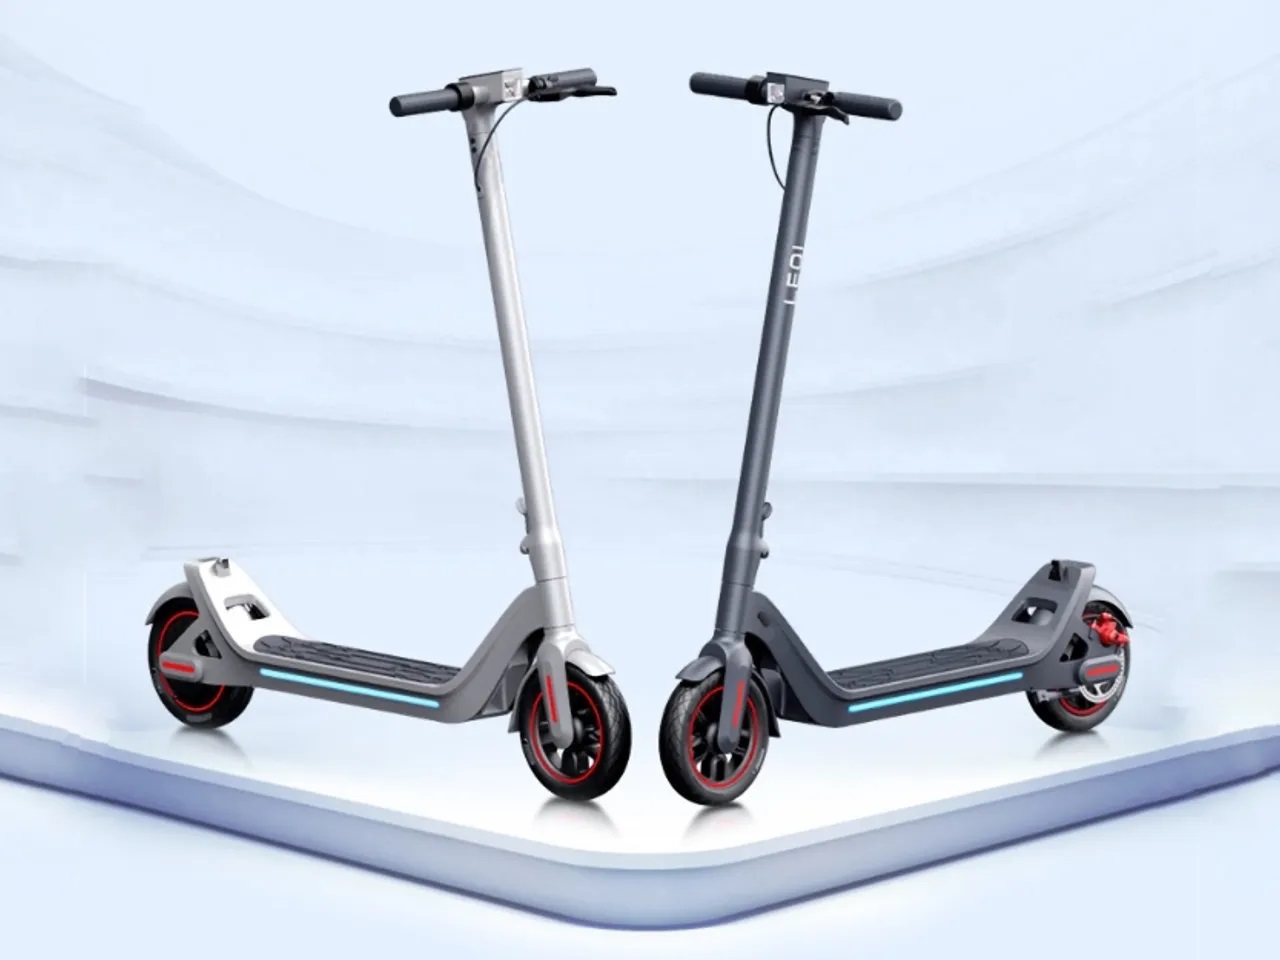 Huawei Leqi: smart electric scooter with HarmonyOS support and gyroscope for $390